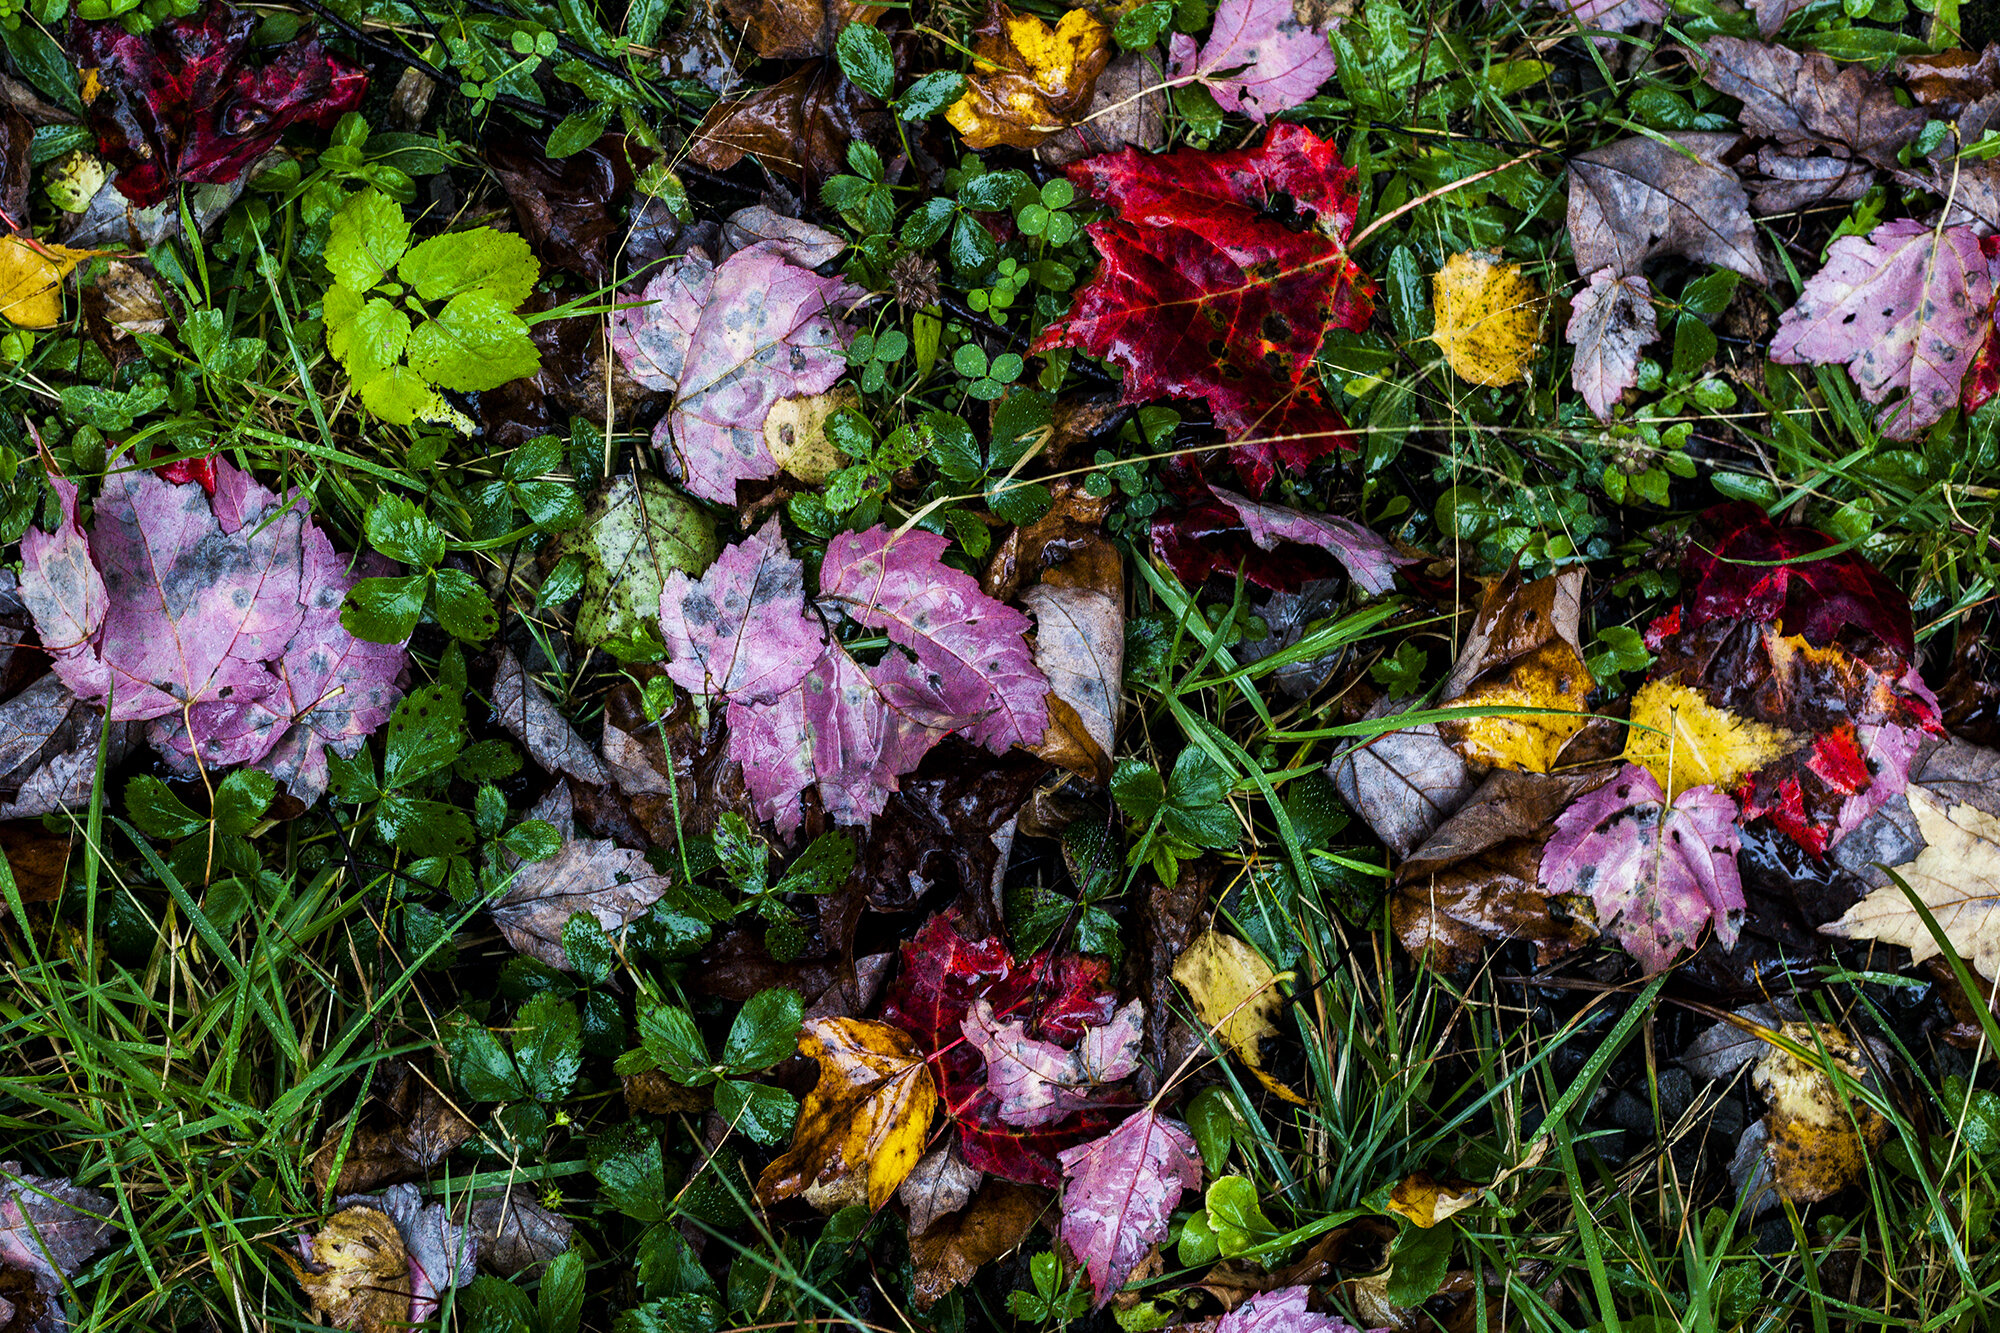 Autumn Leaves on The Forest Floor